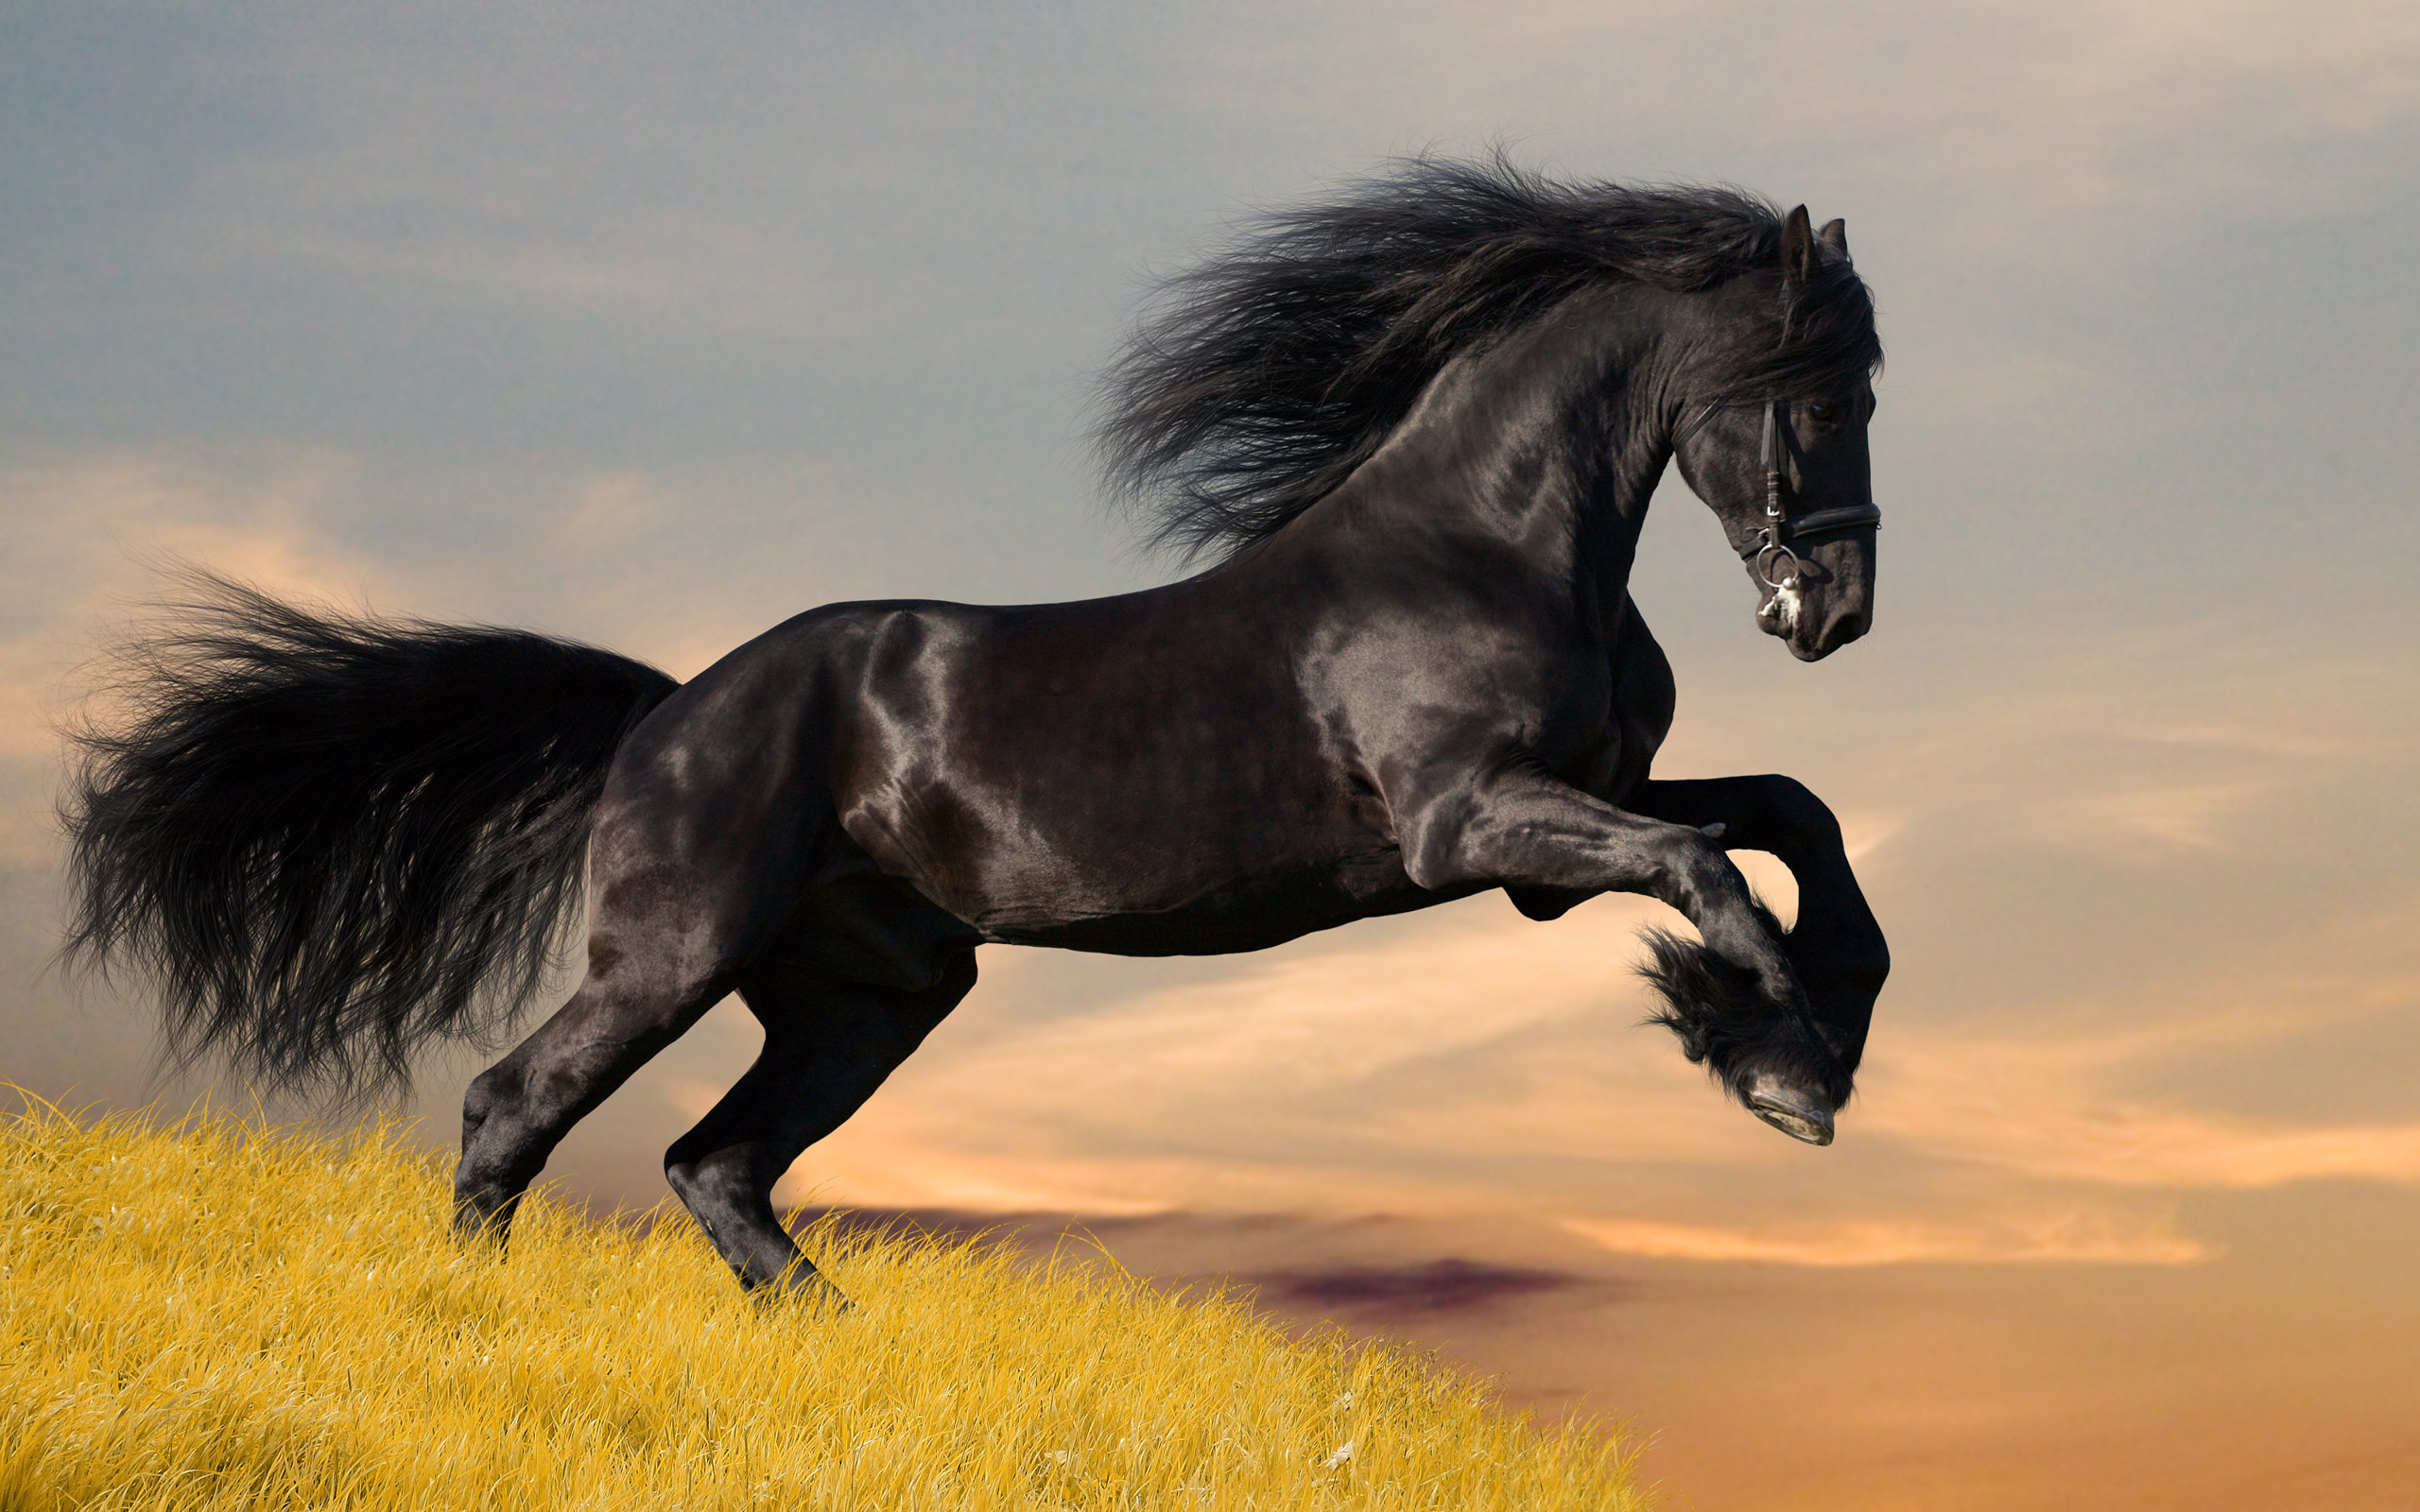 Black mustang horse wallpapers and images - wallpapers, pictures, photos